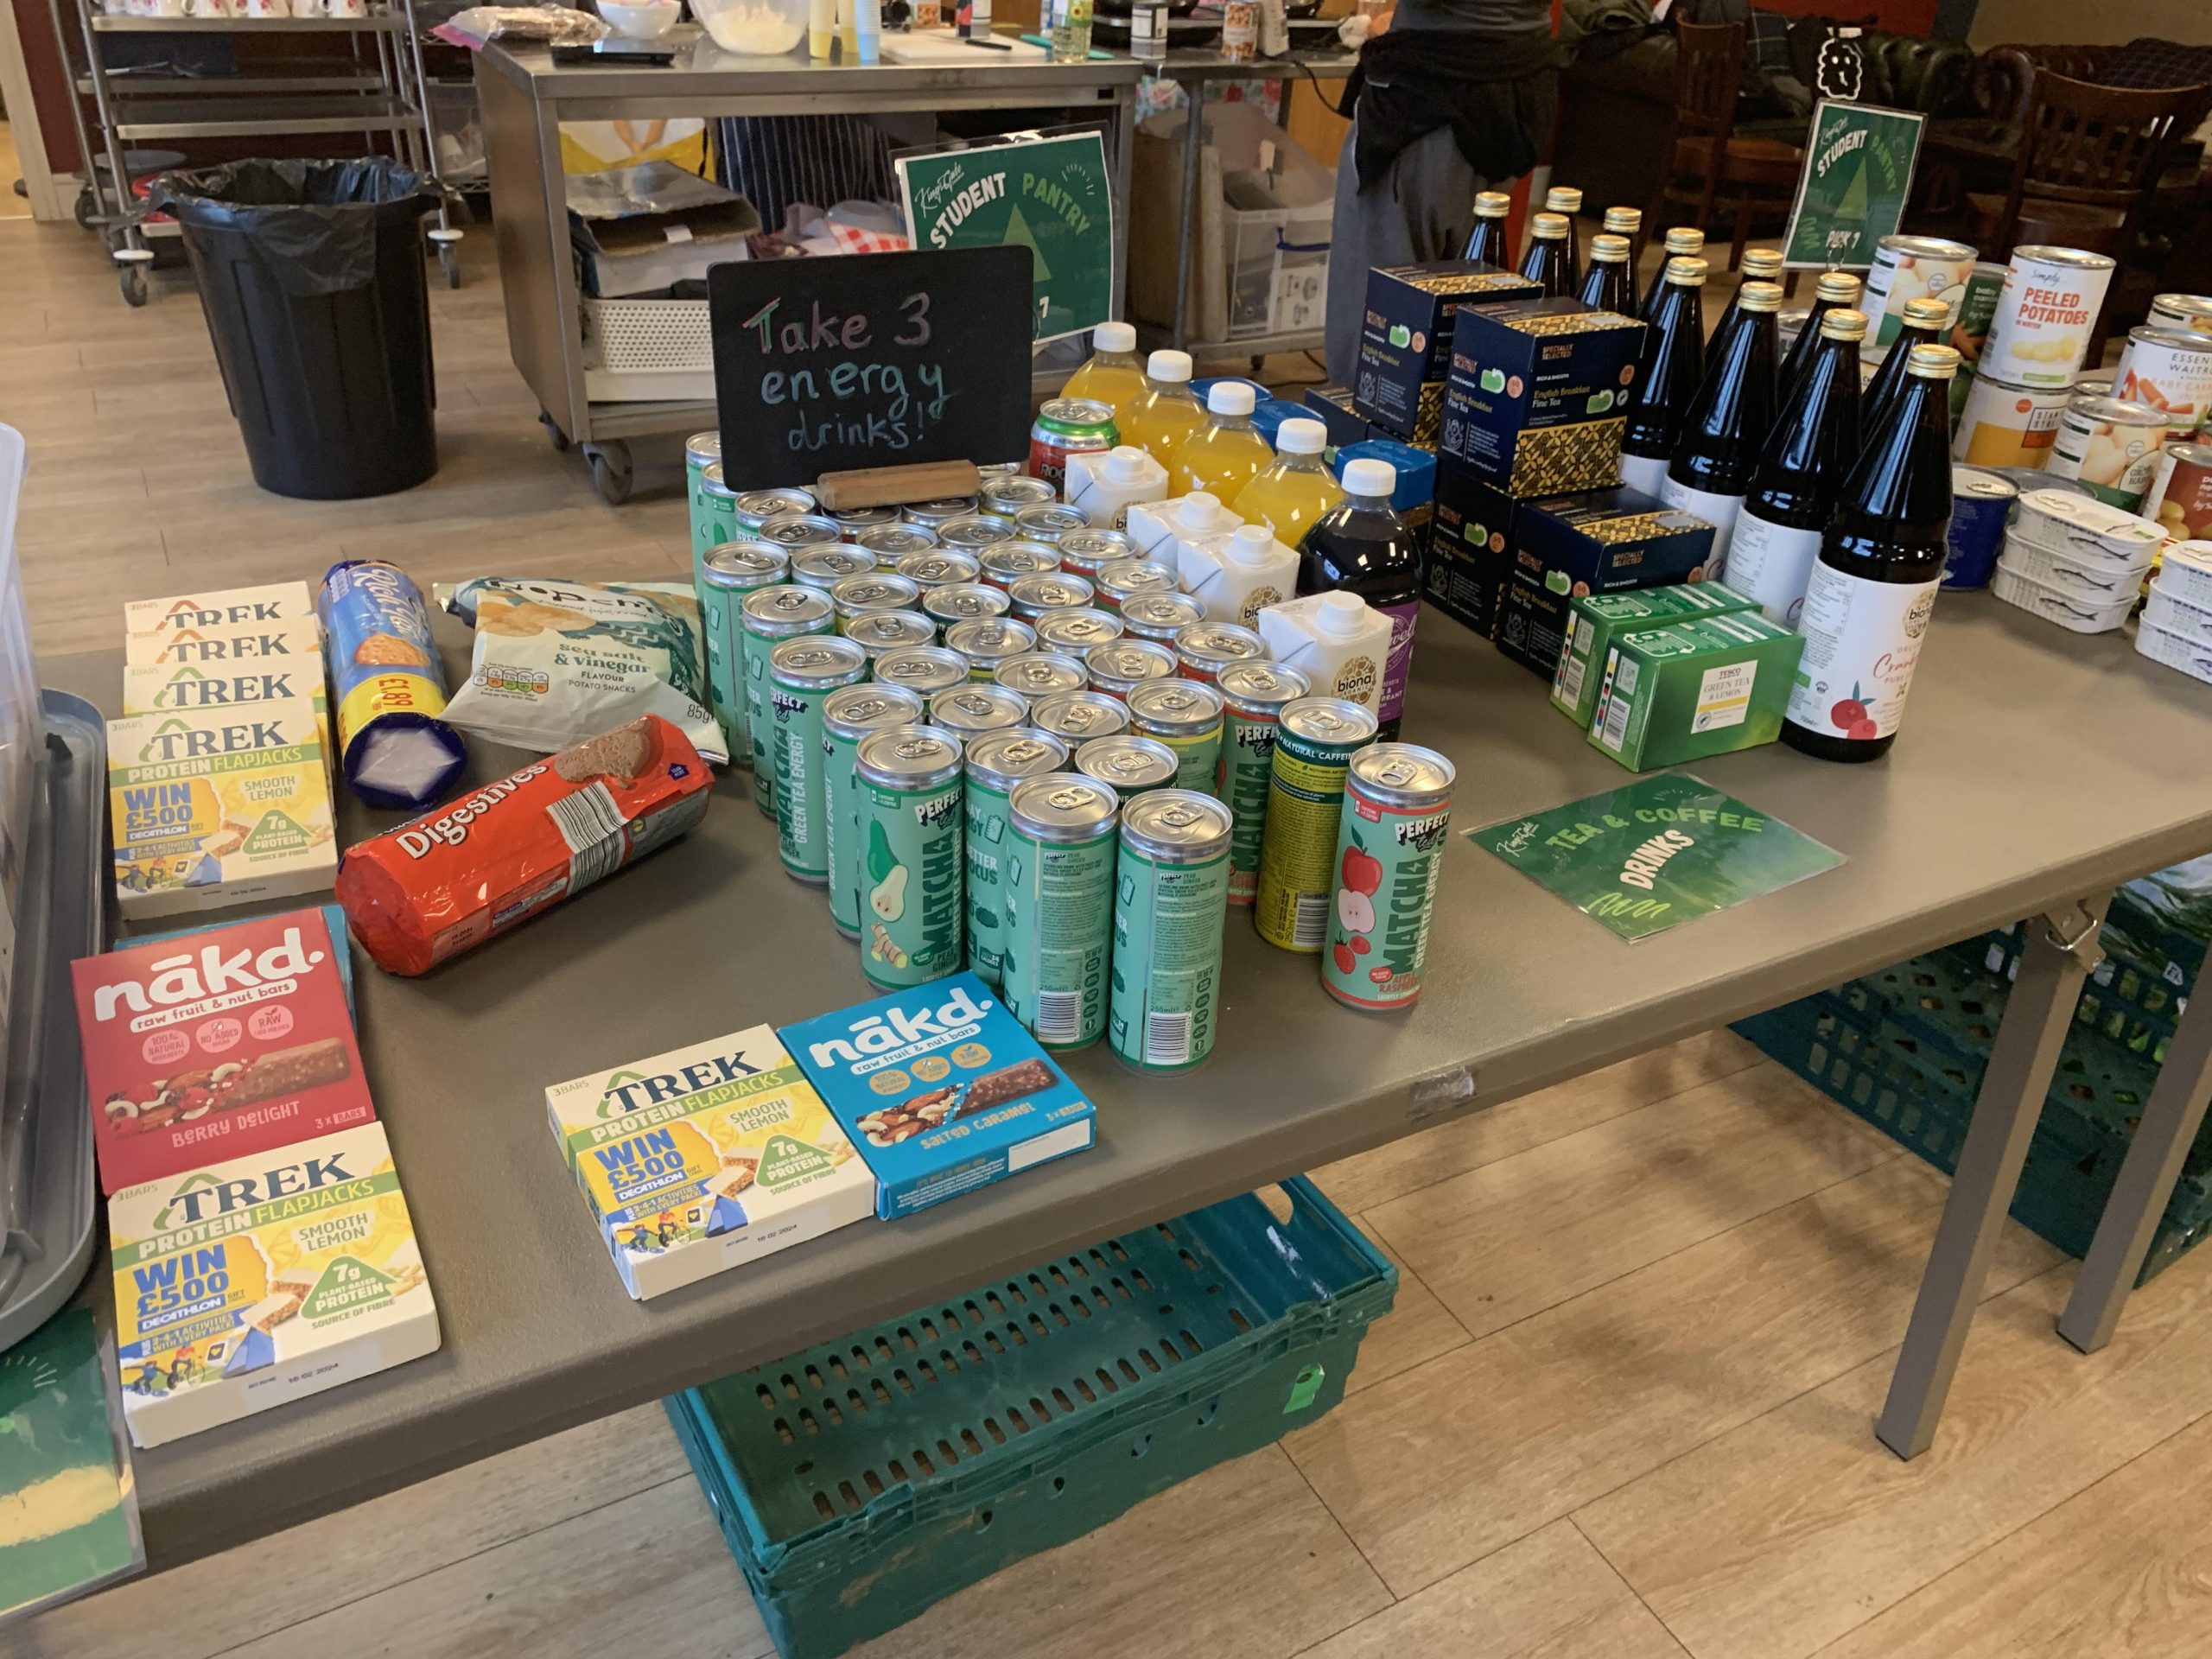 A table at a food pantry with various breakfast items, drinks, and canned foods visible.